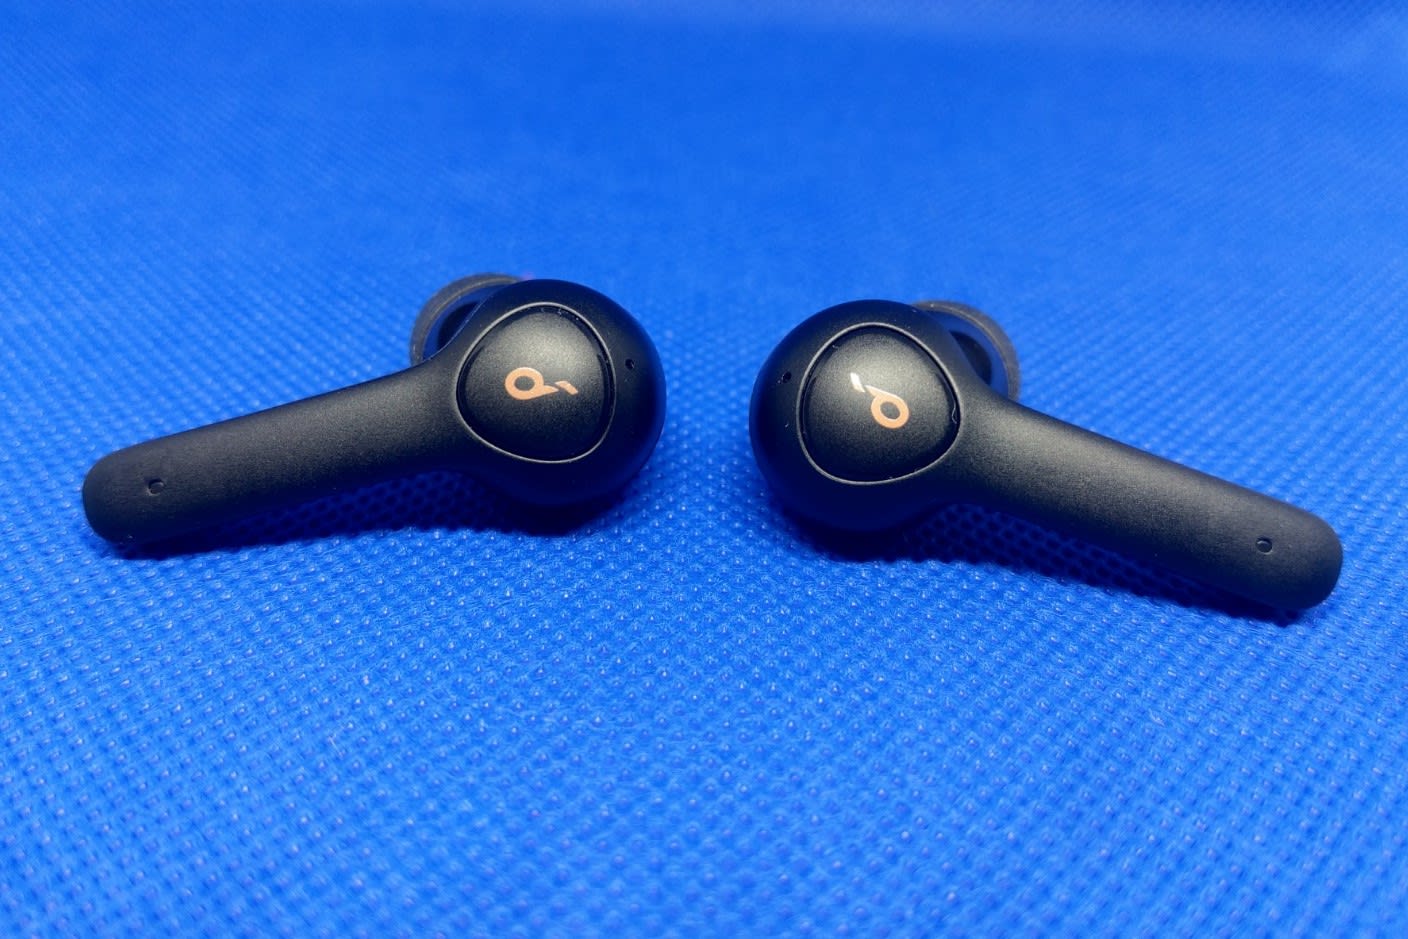 Anker Soundcore Life P2 True Wireless Earbuds: Surprisingly Good - Latest Tech News, Reviews, Tips And Tutorials